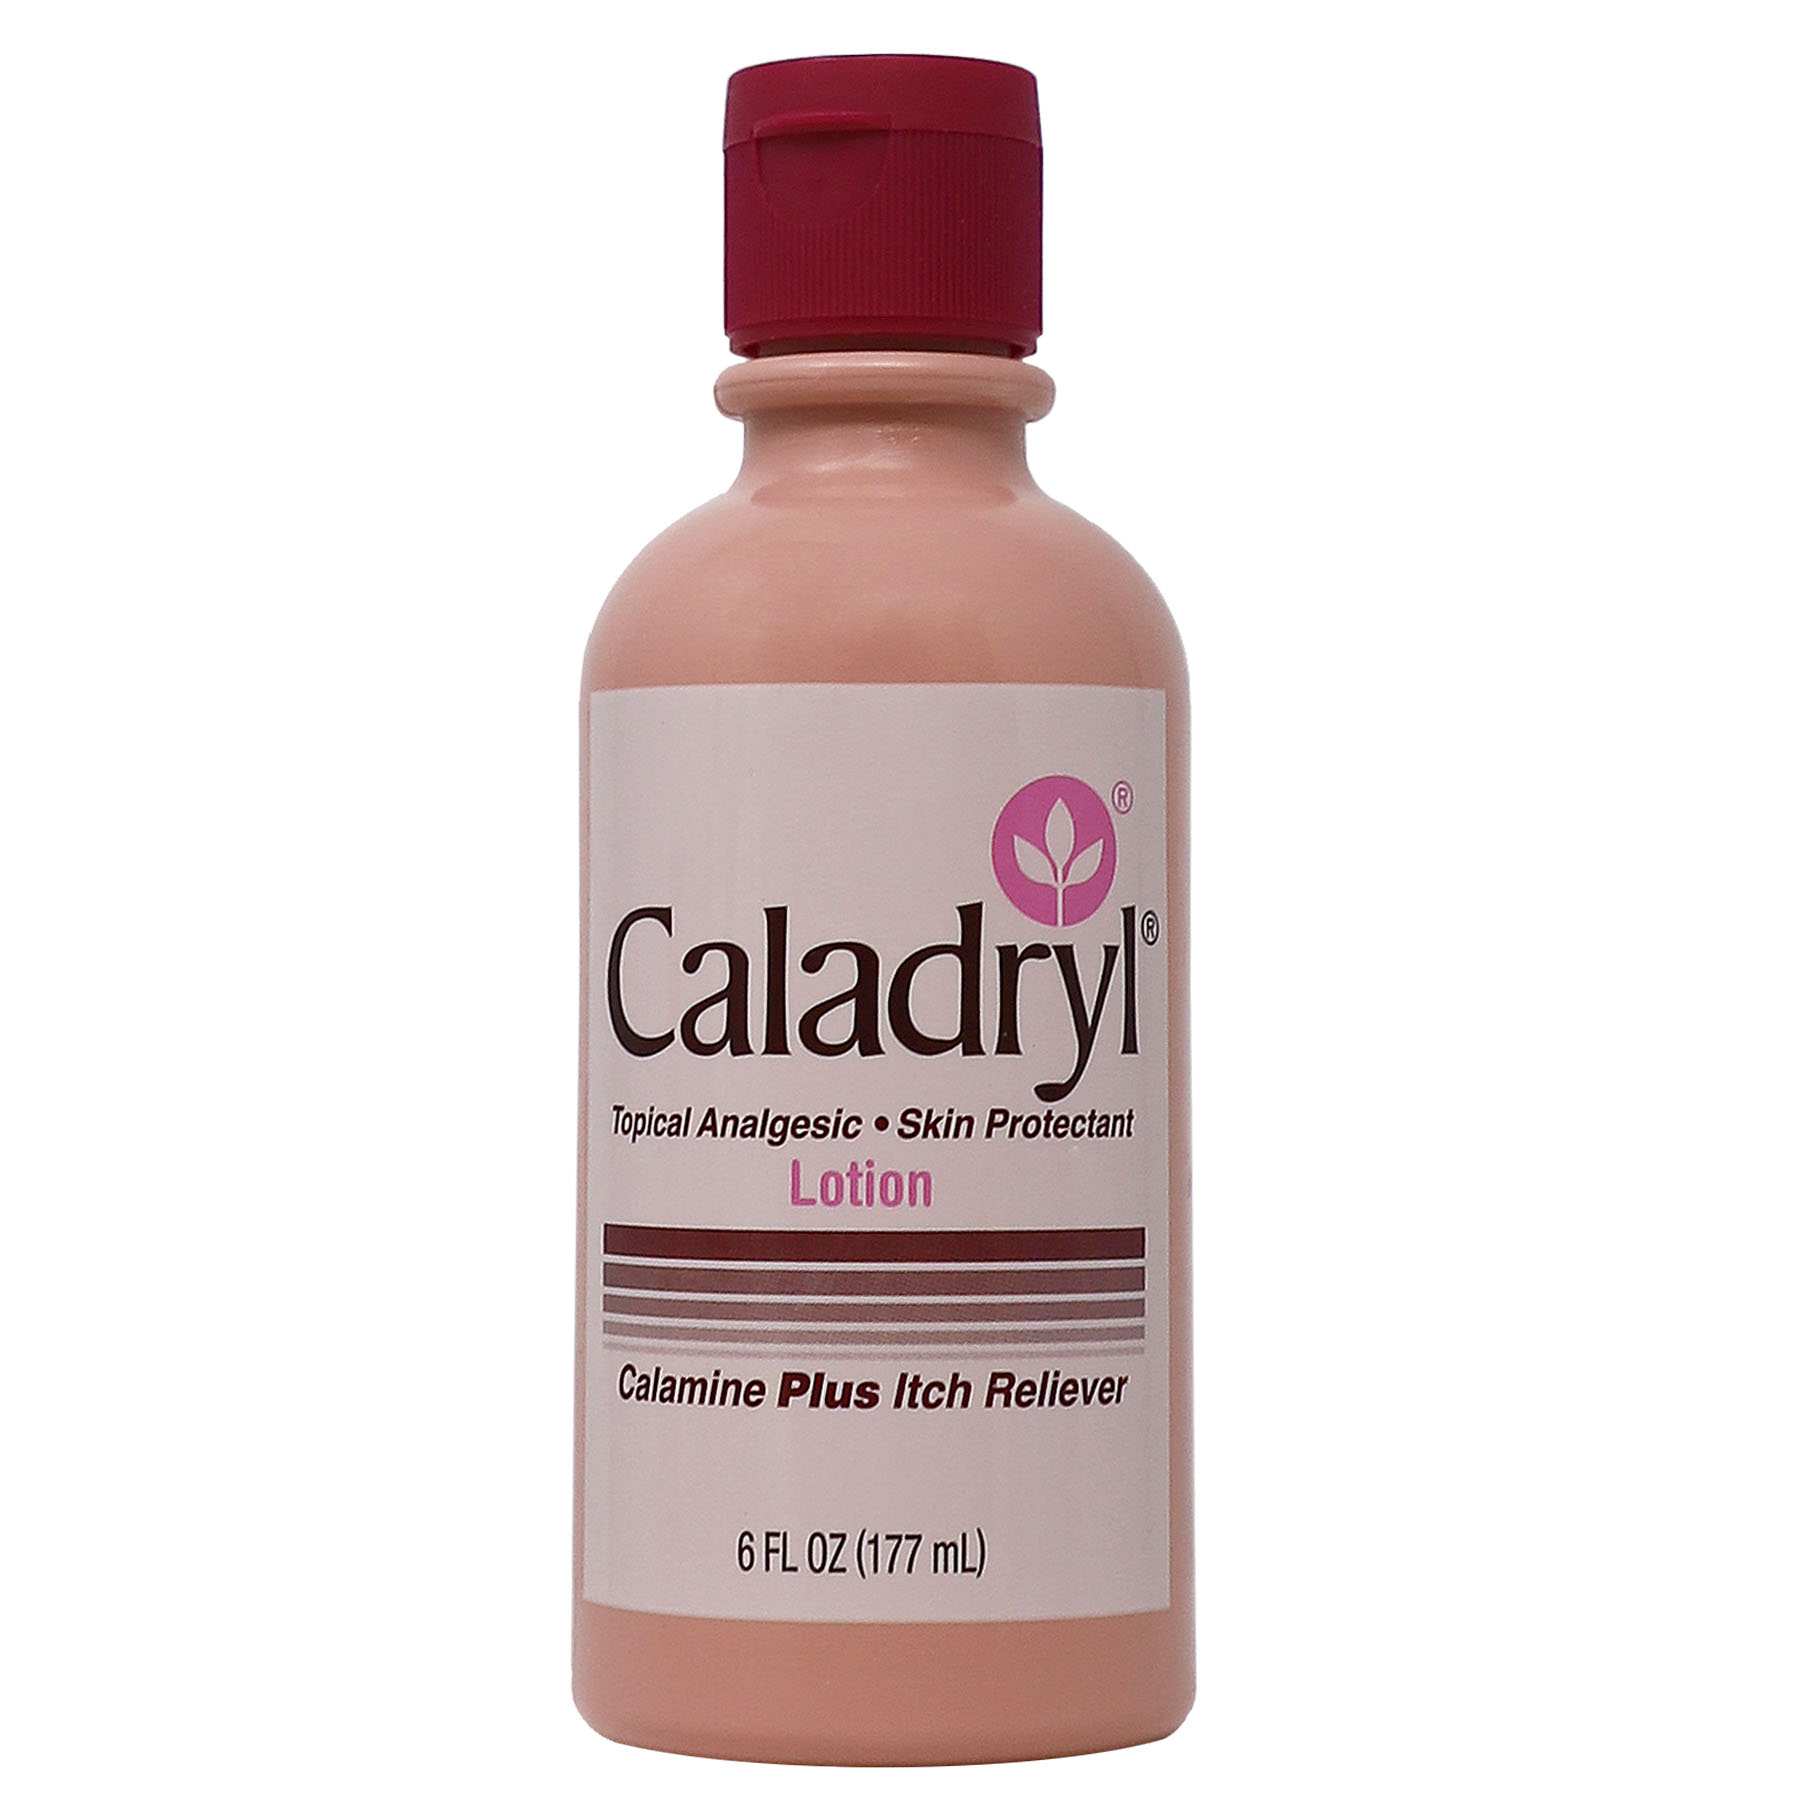 Caladryl Skin Protectant Lotion, Calamine + Itch Reliever, 6 fl oz. - image 1 of 2